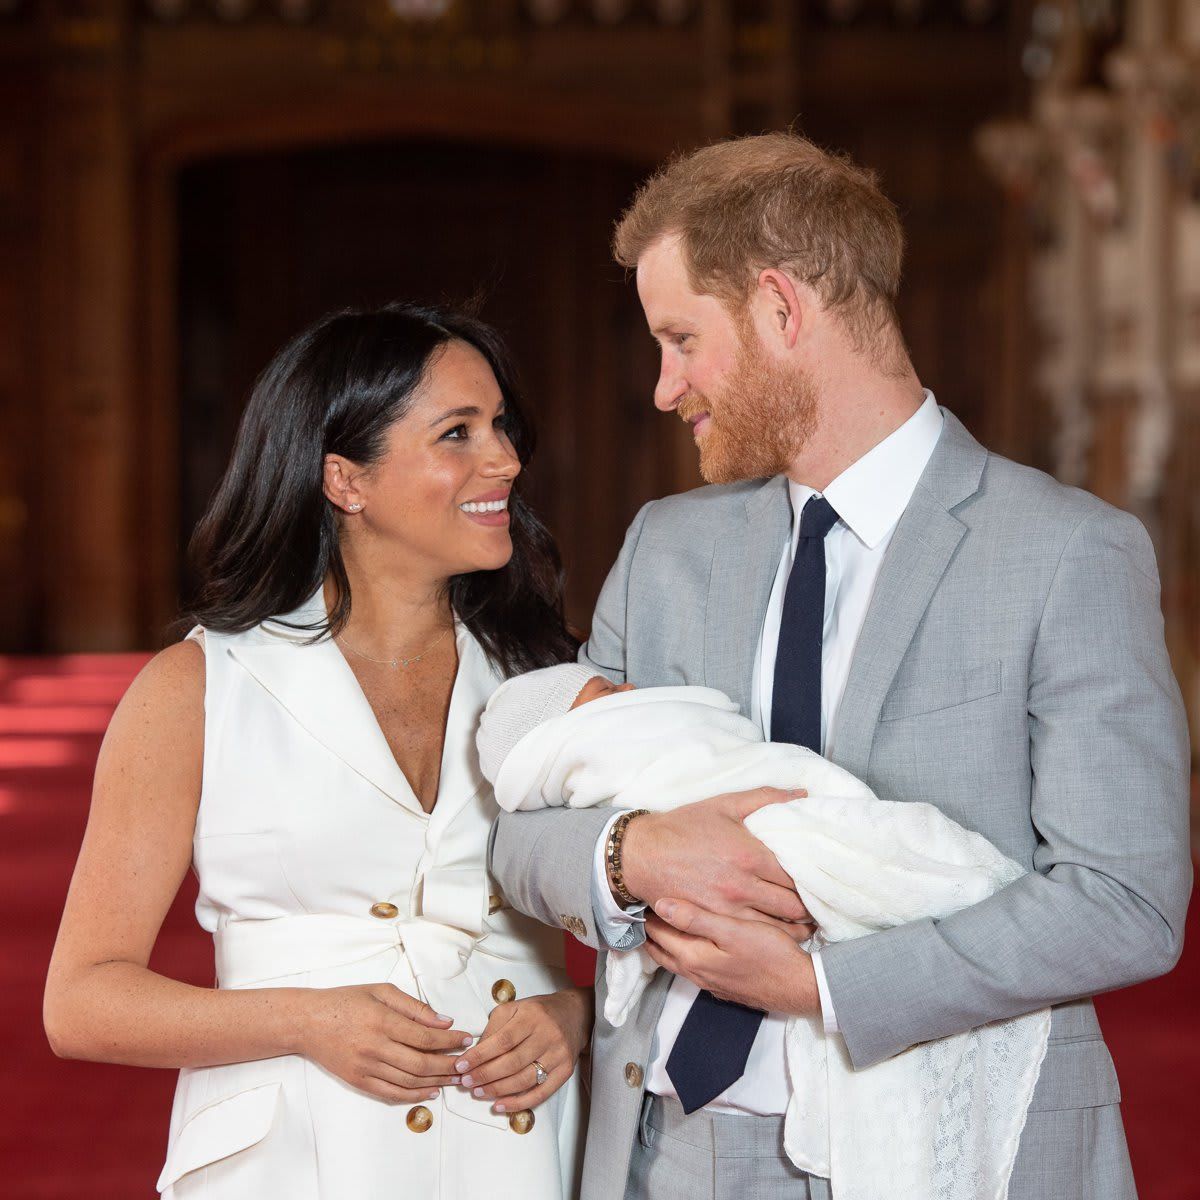 The Duke and Duchess of Sussex's daughter is currently the youngest of Princess Diana's grandchildren